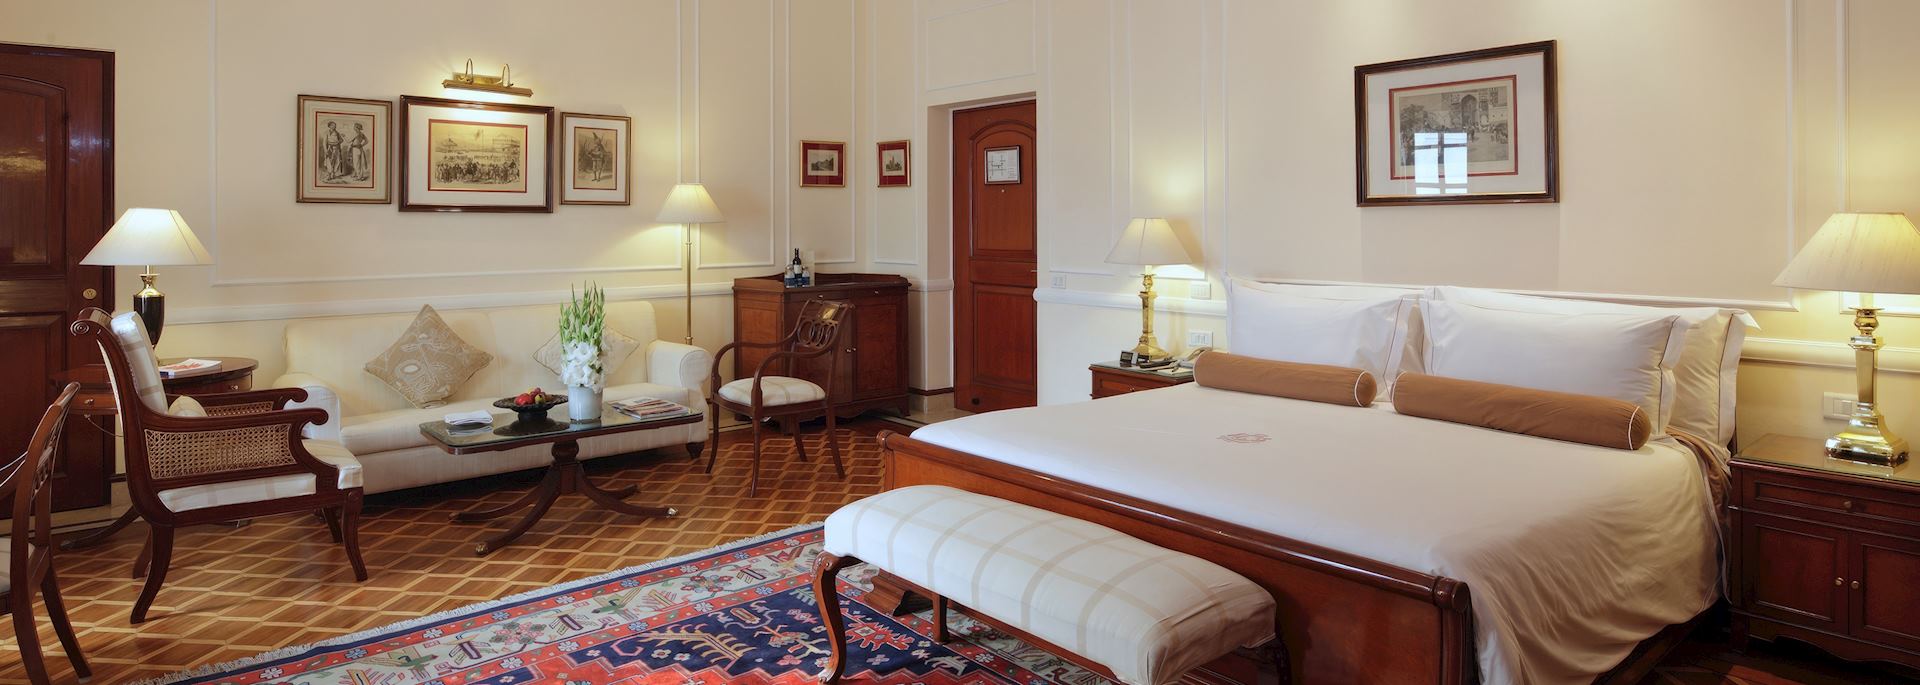 Grand Heritage Room, The Imperial